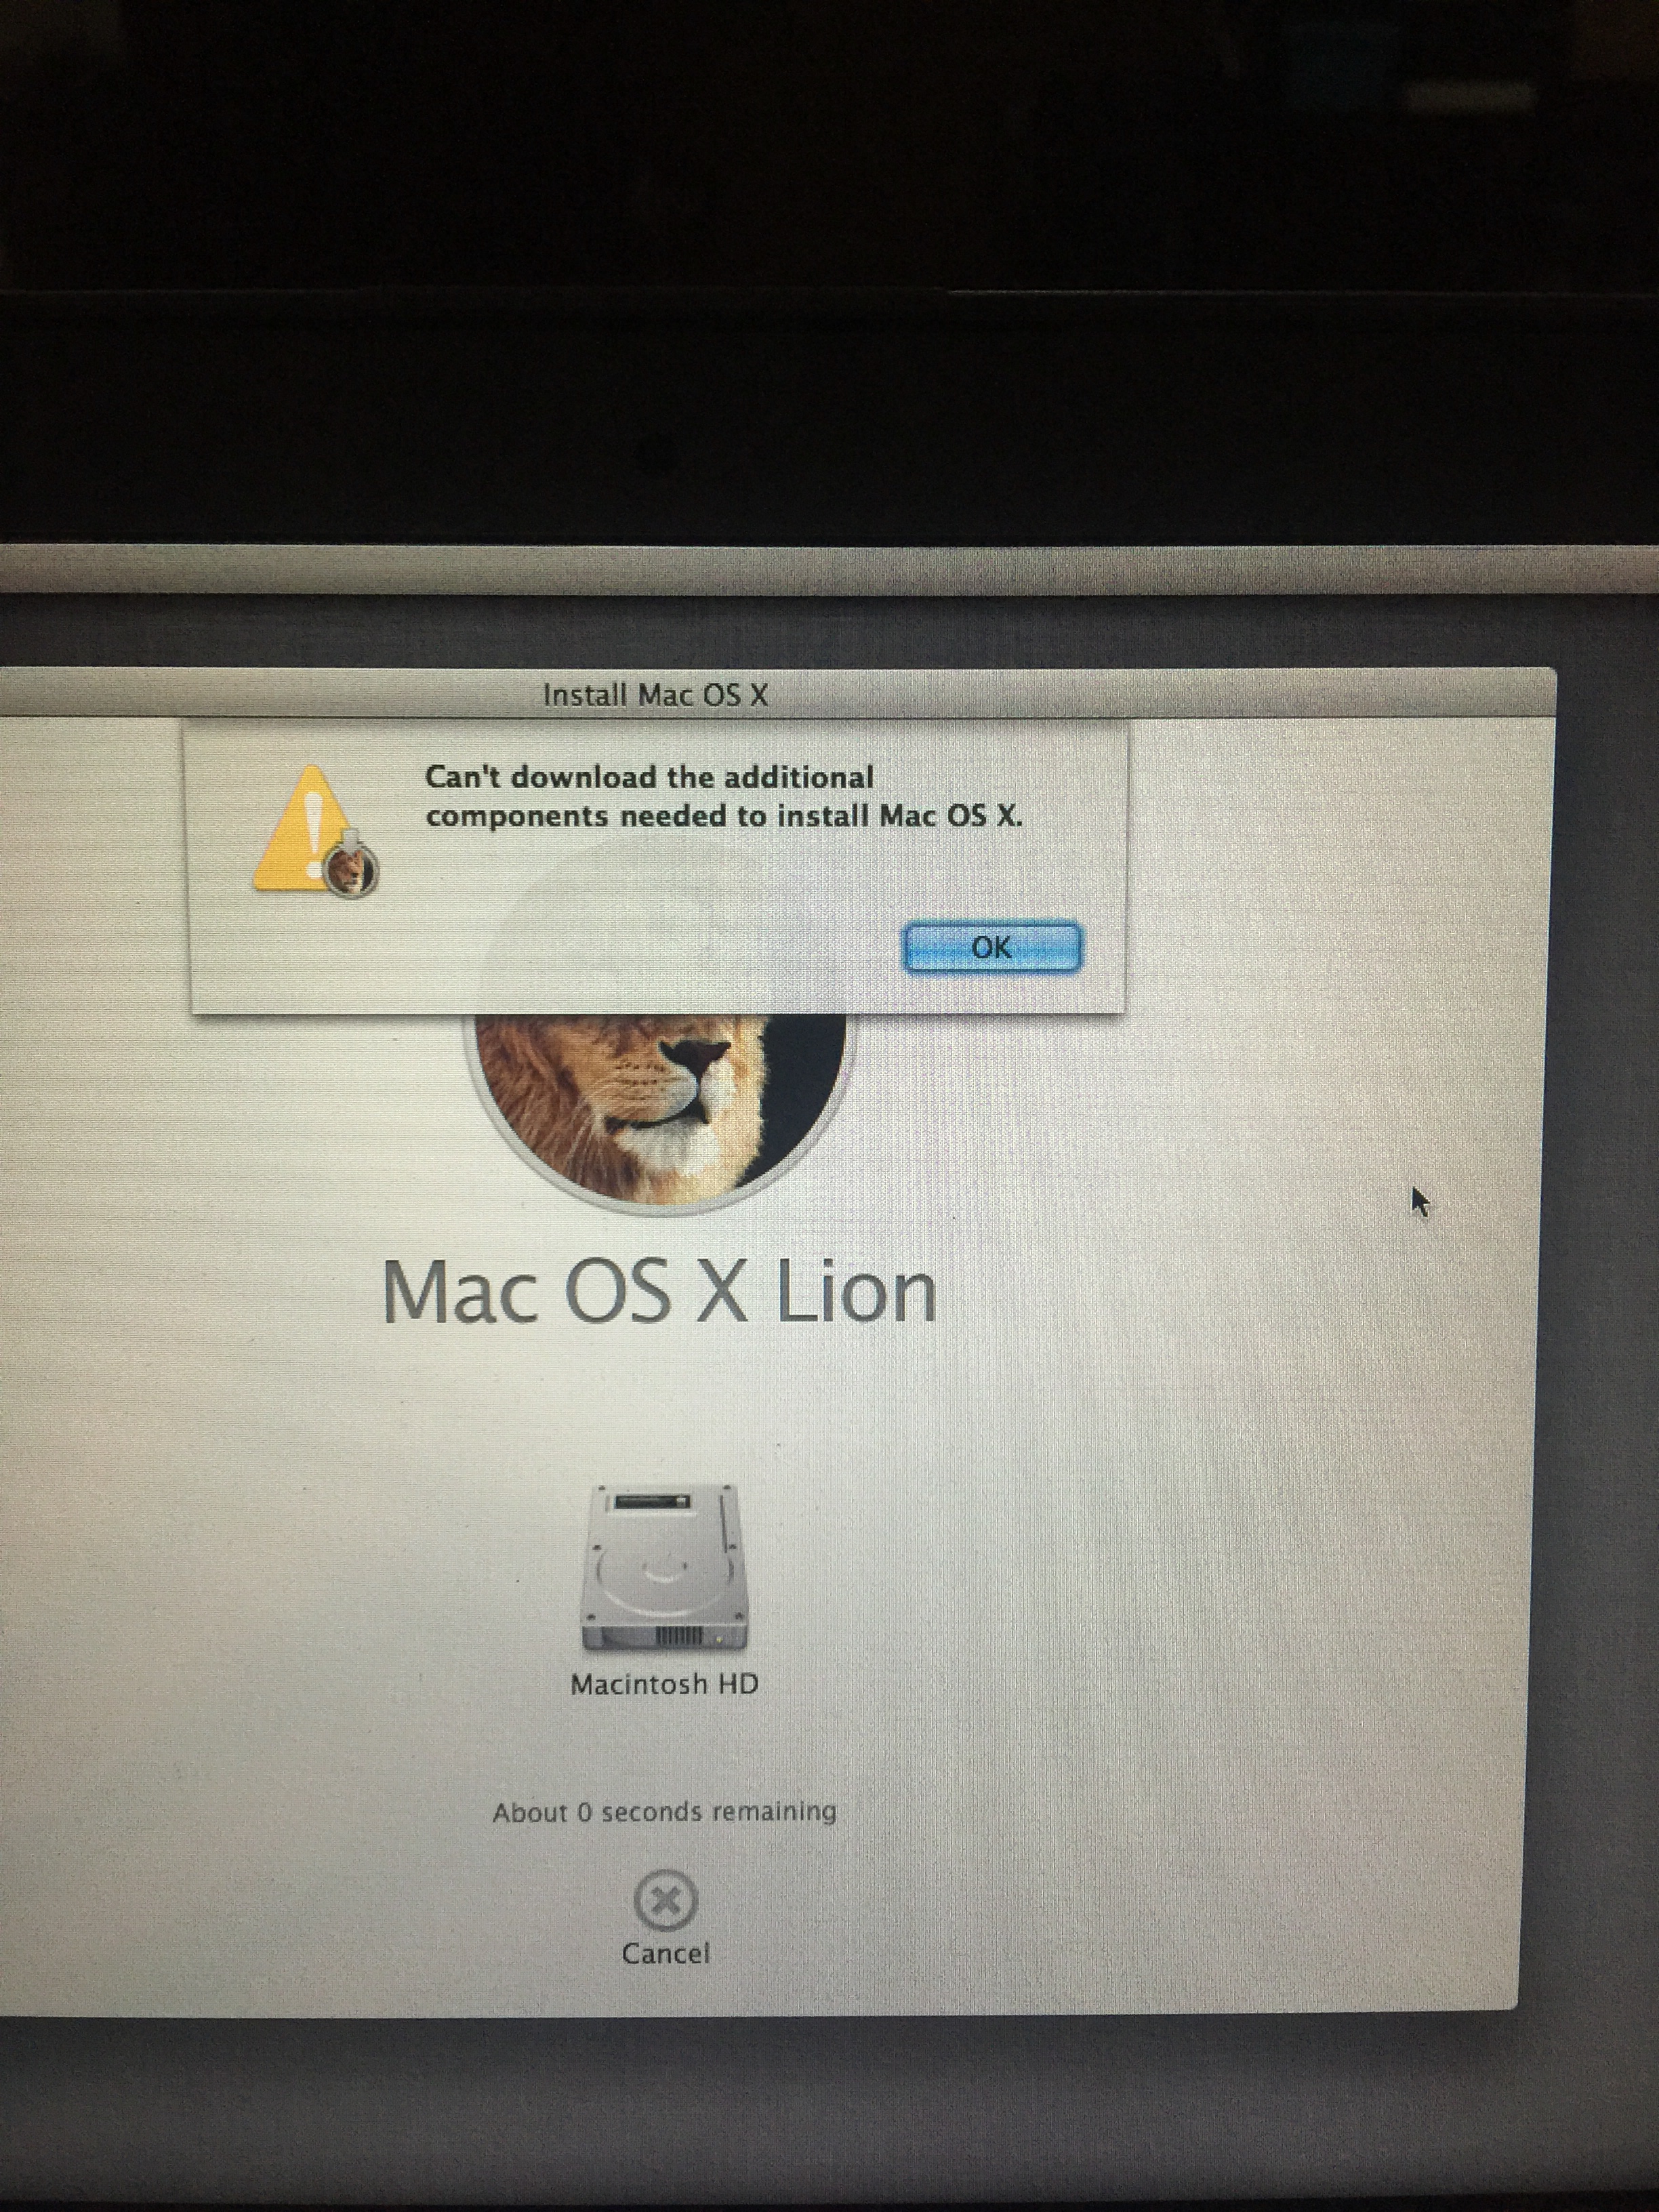 mac os x lion cannot download additional components